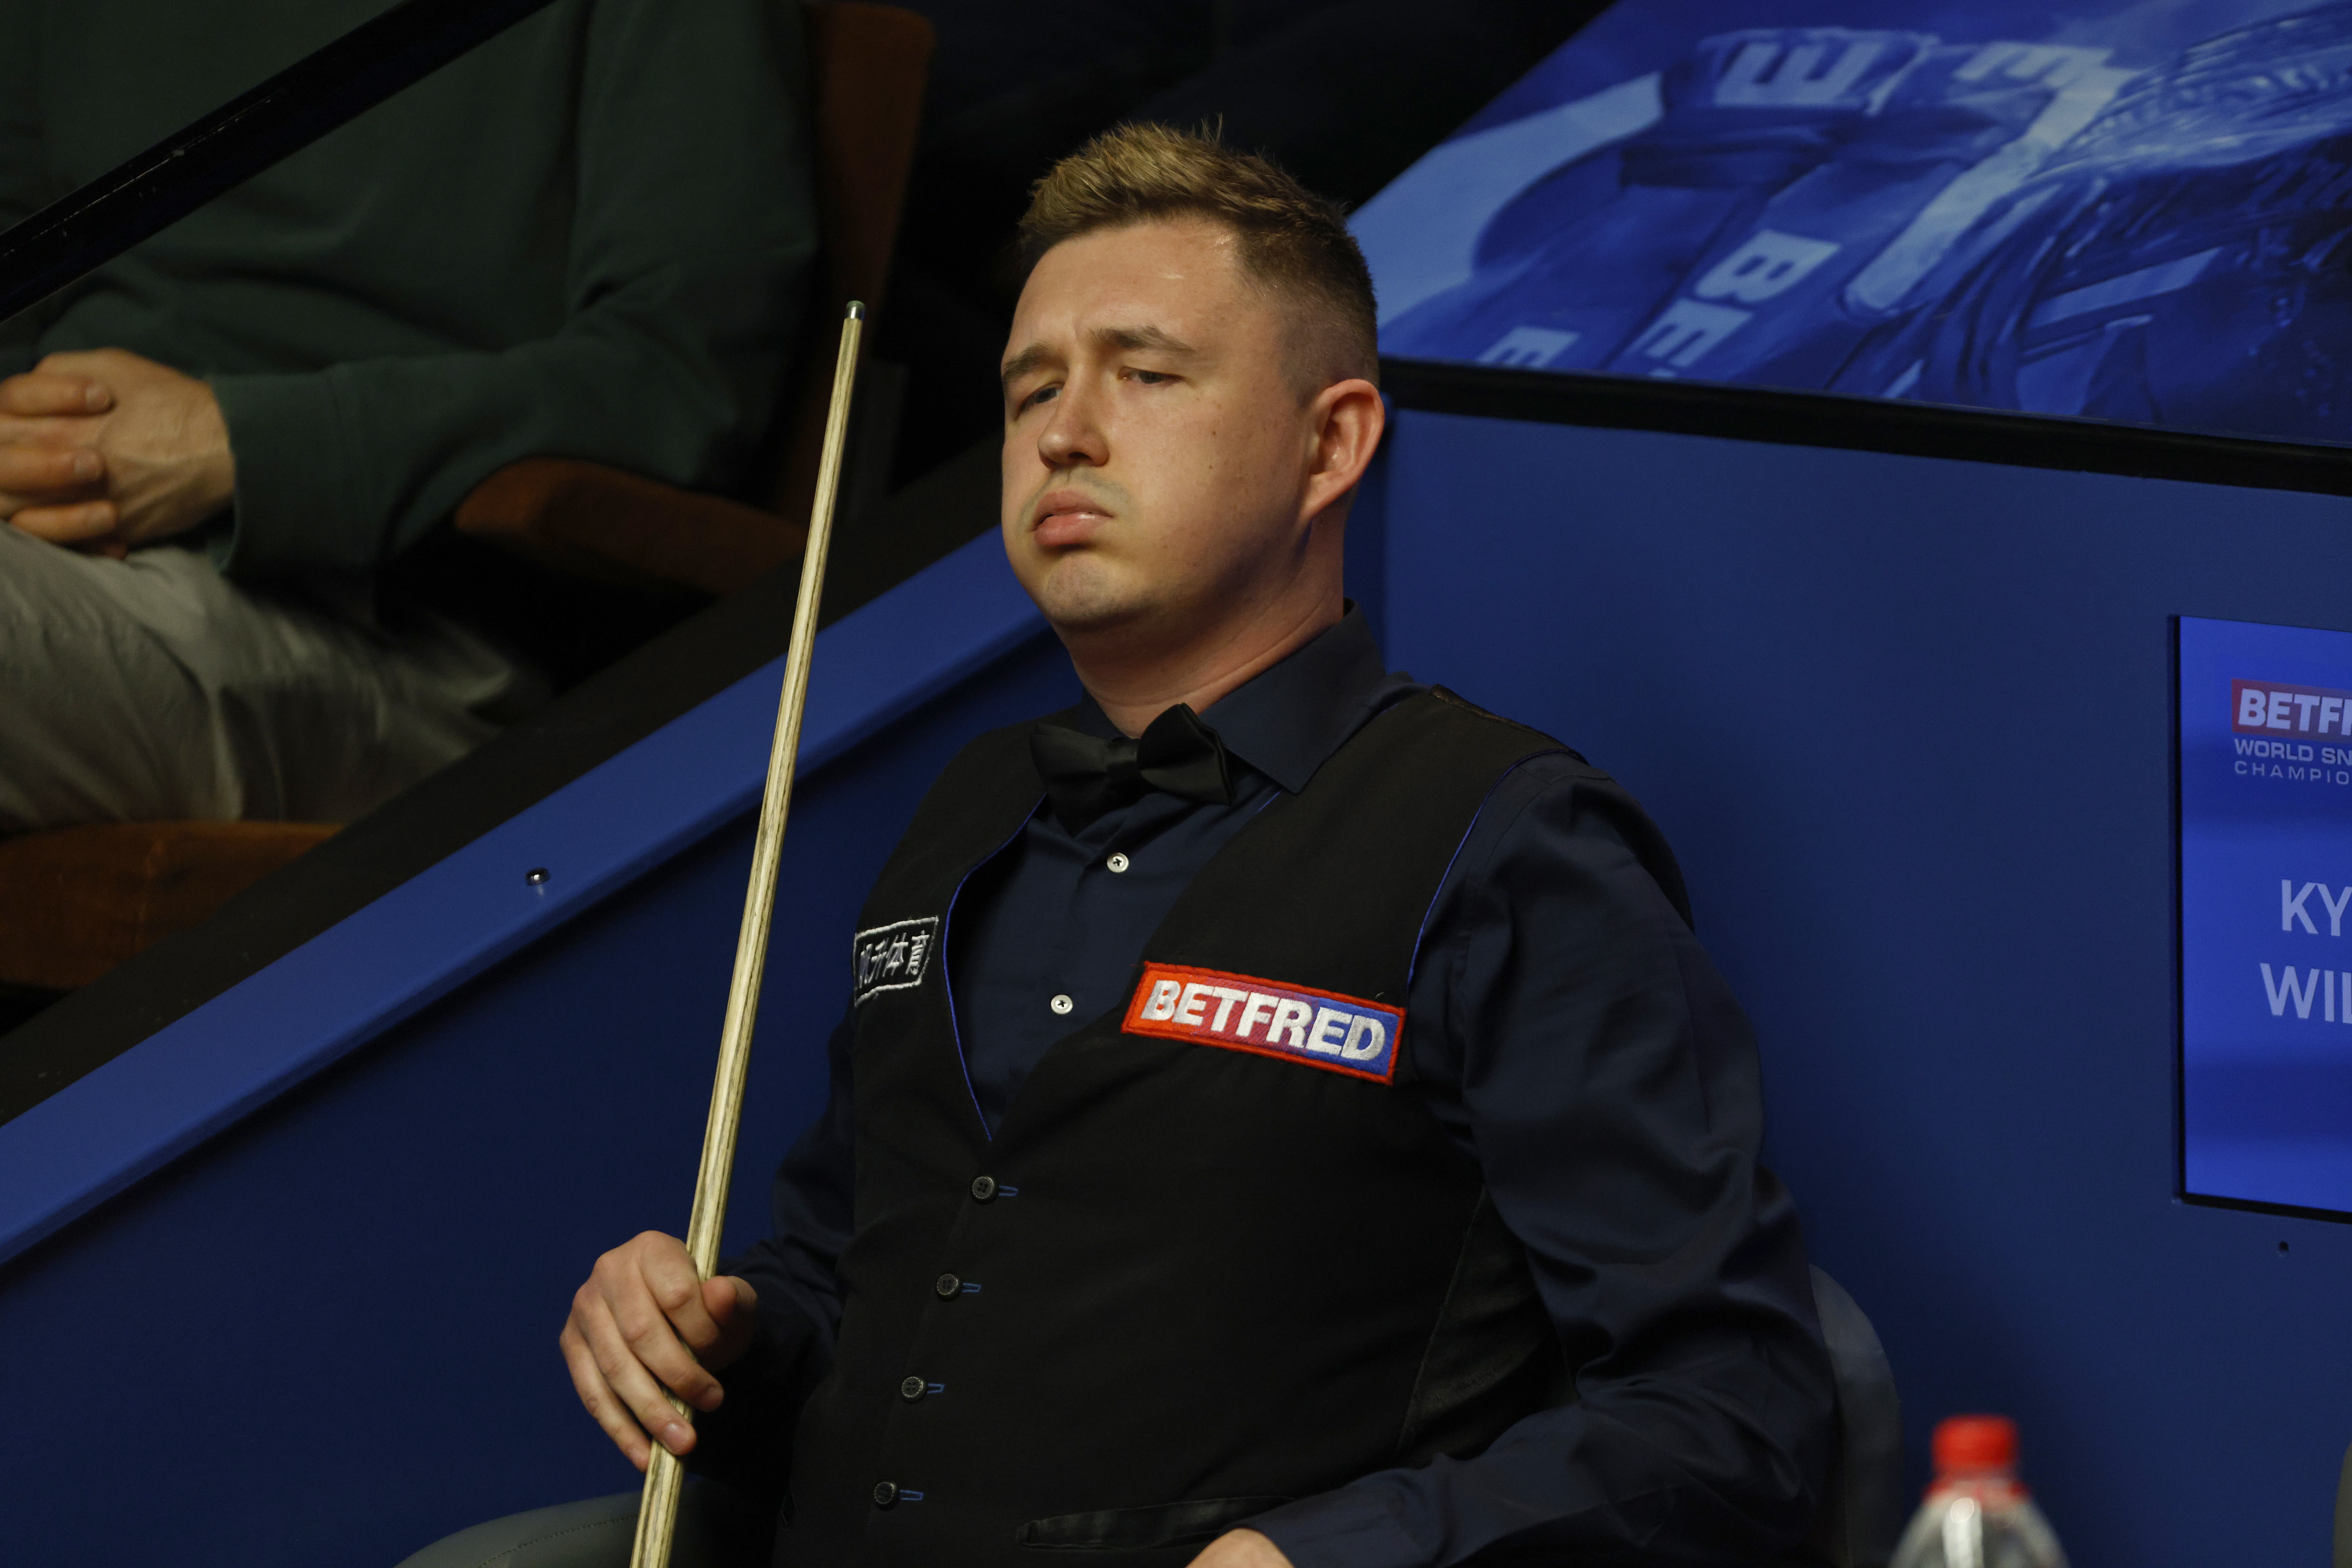 Youngster Riley Powell shocks Kyren Wilson in Snooker Shoot Out The Independent